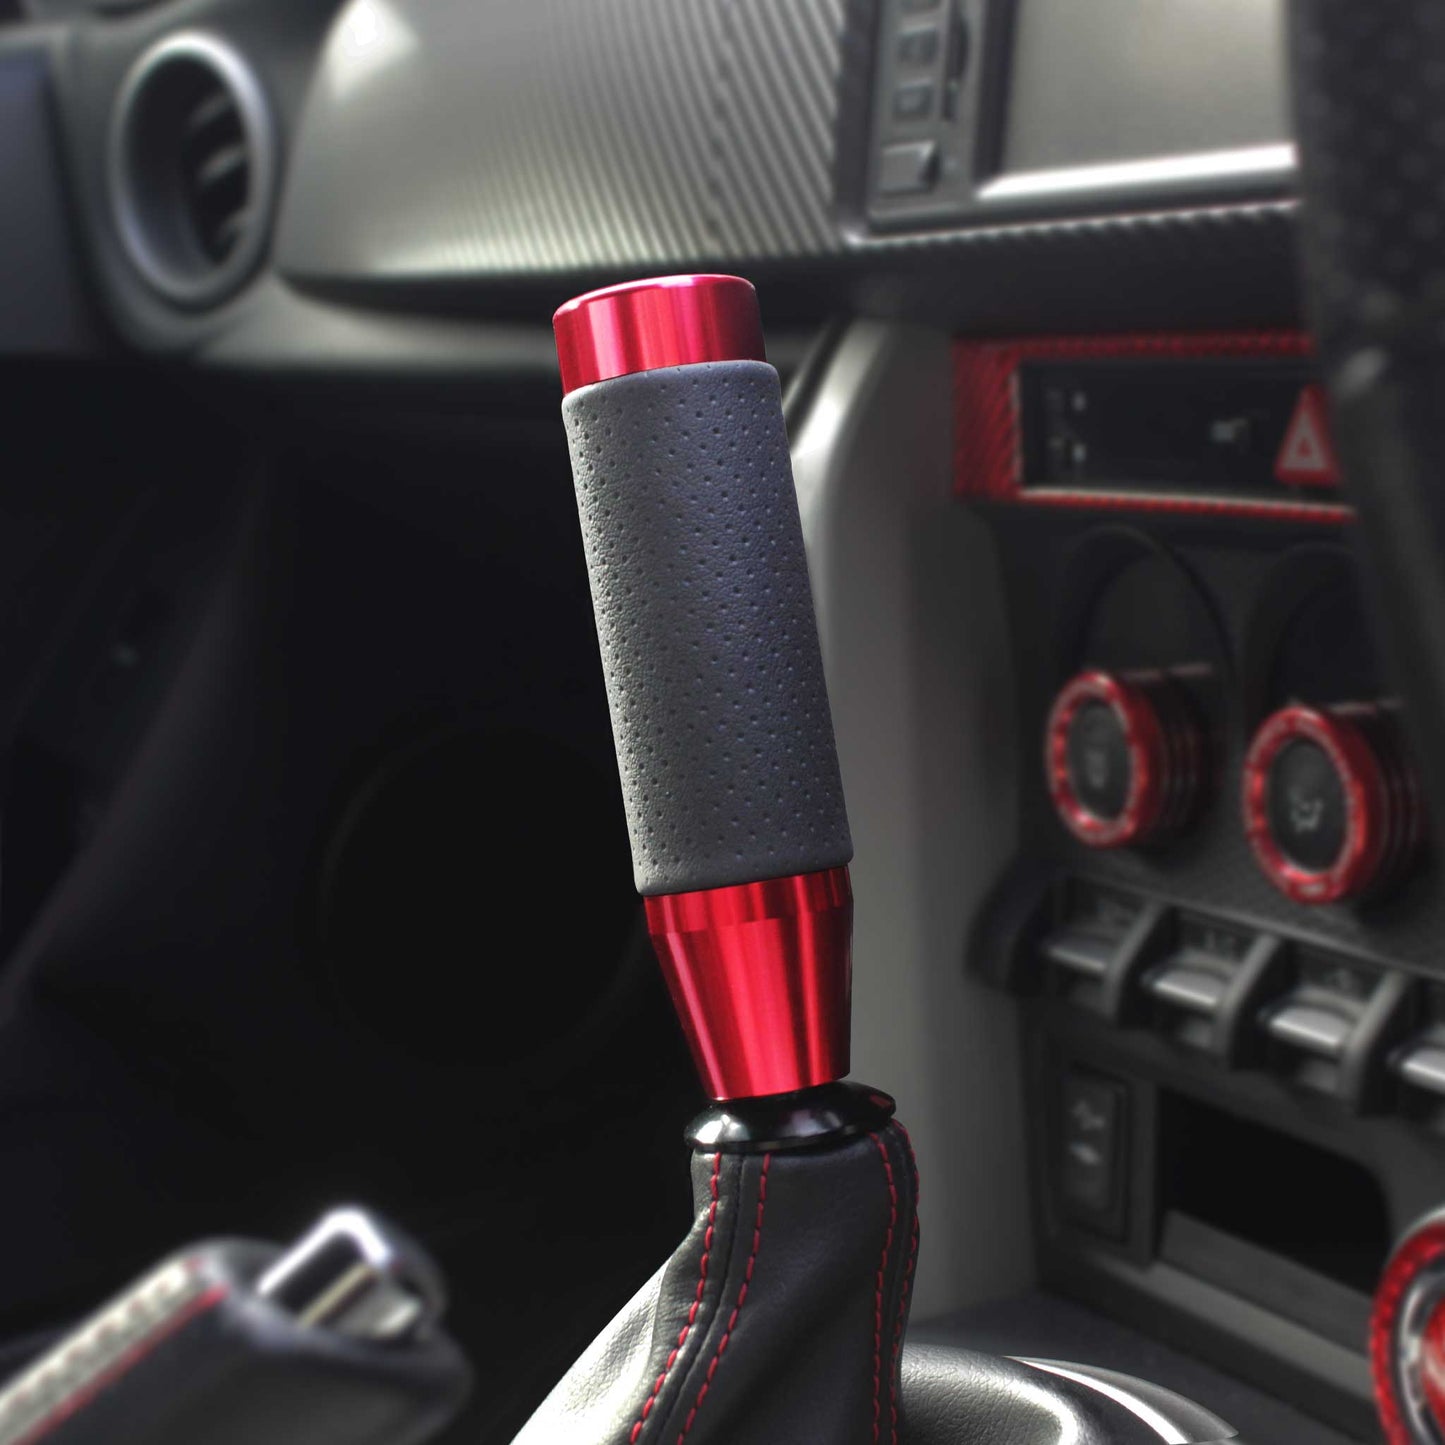 A red leather grip shift knob is installed on an auto Toyota 86 seamlessly